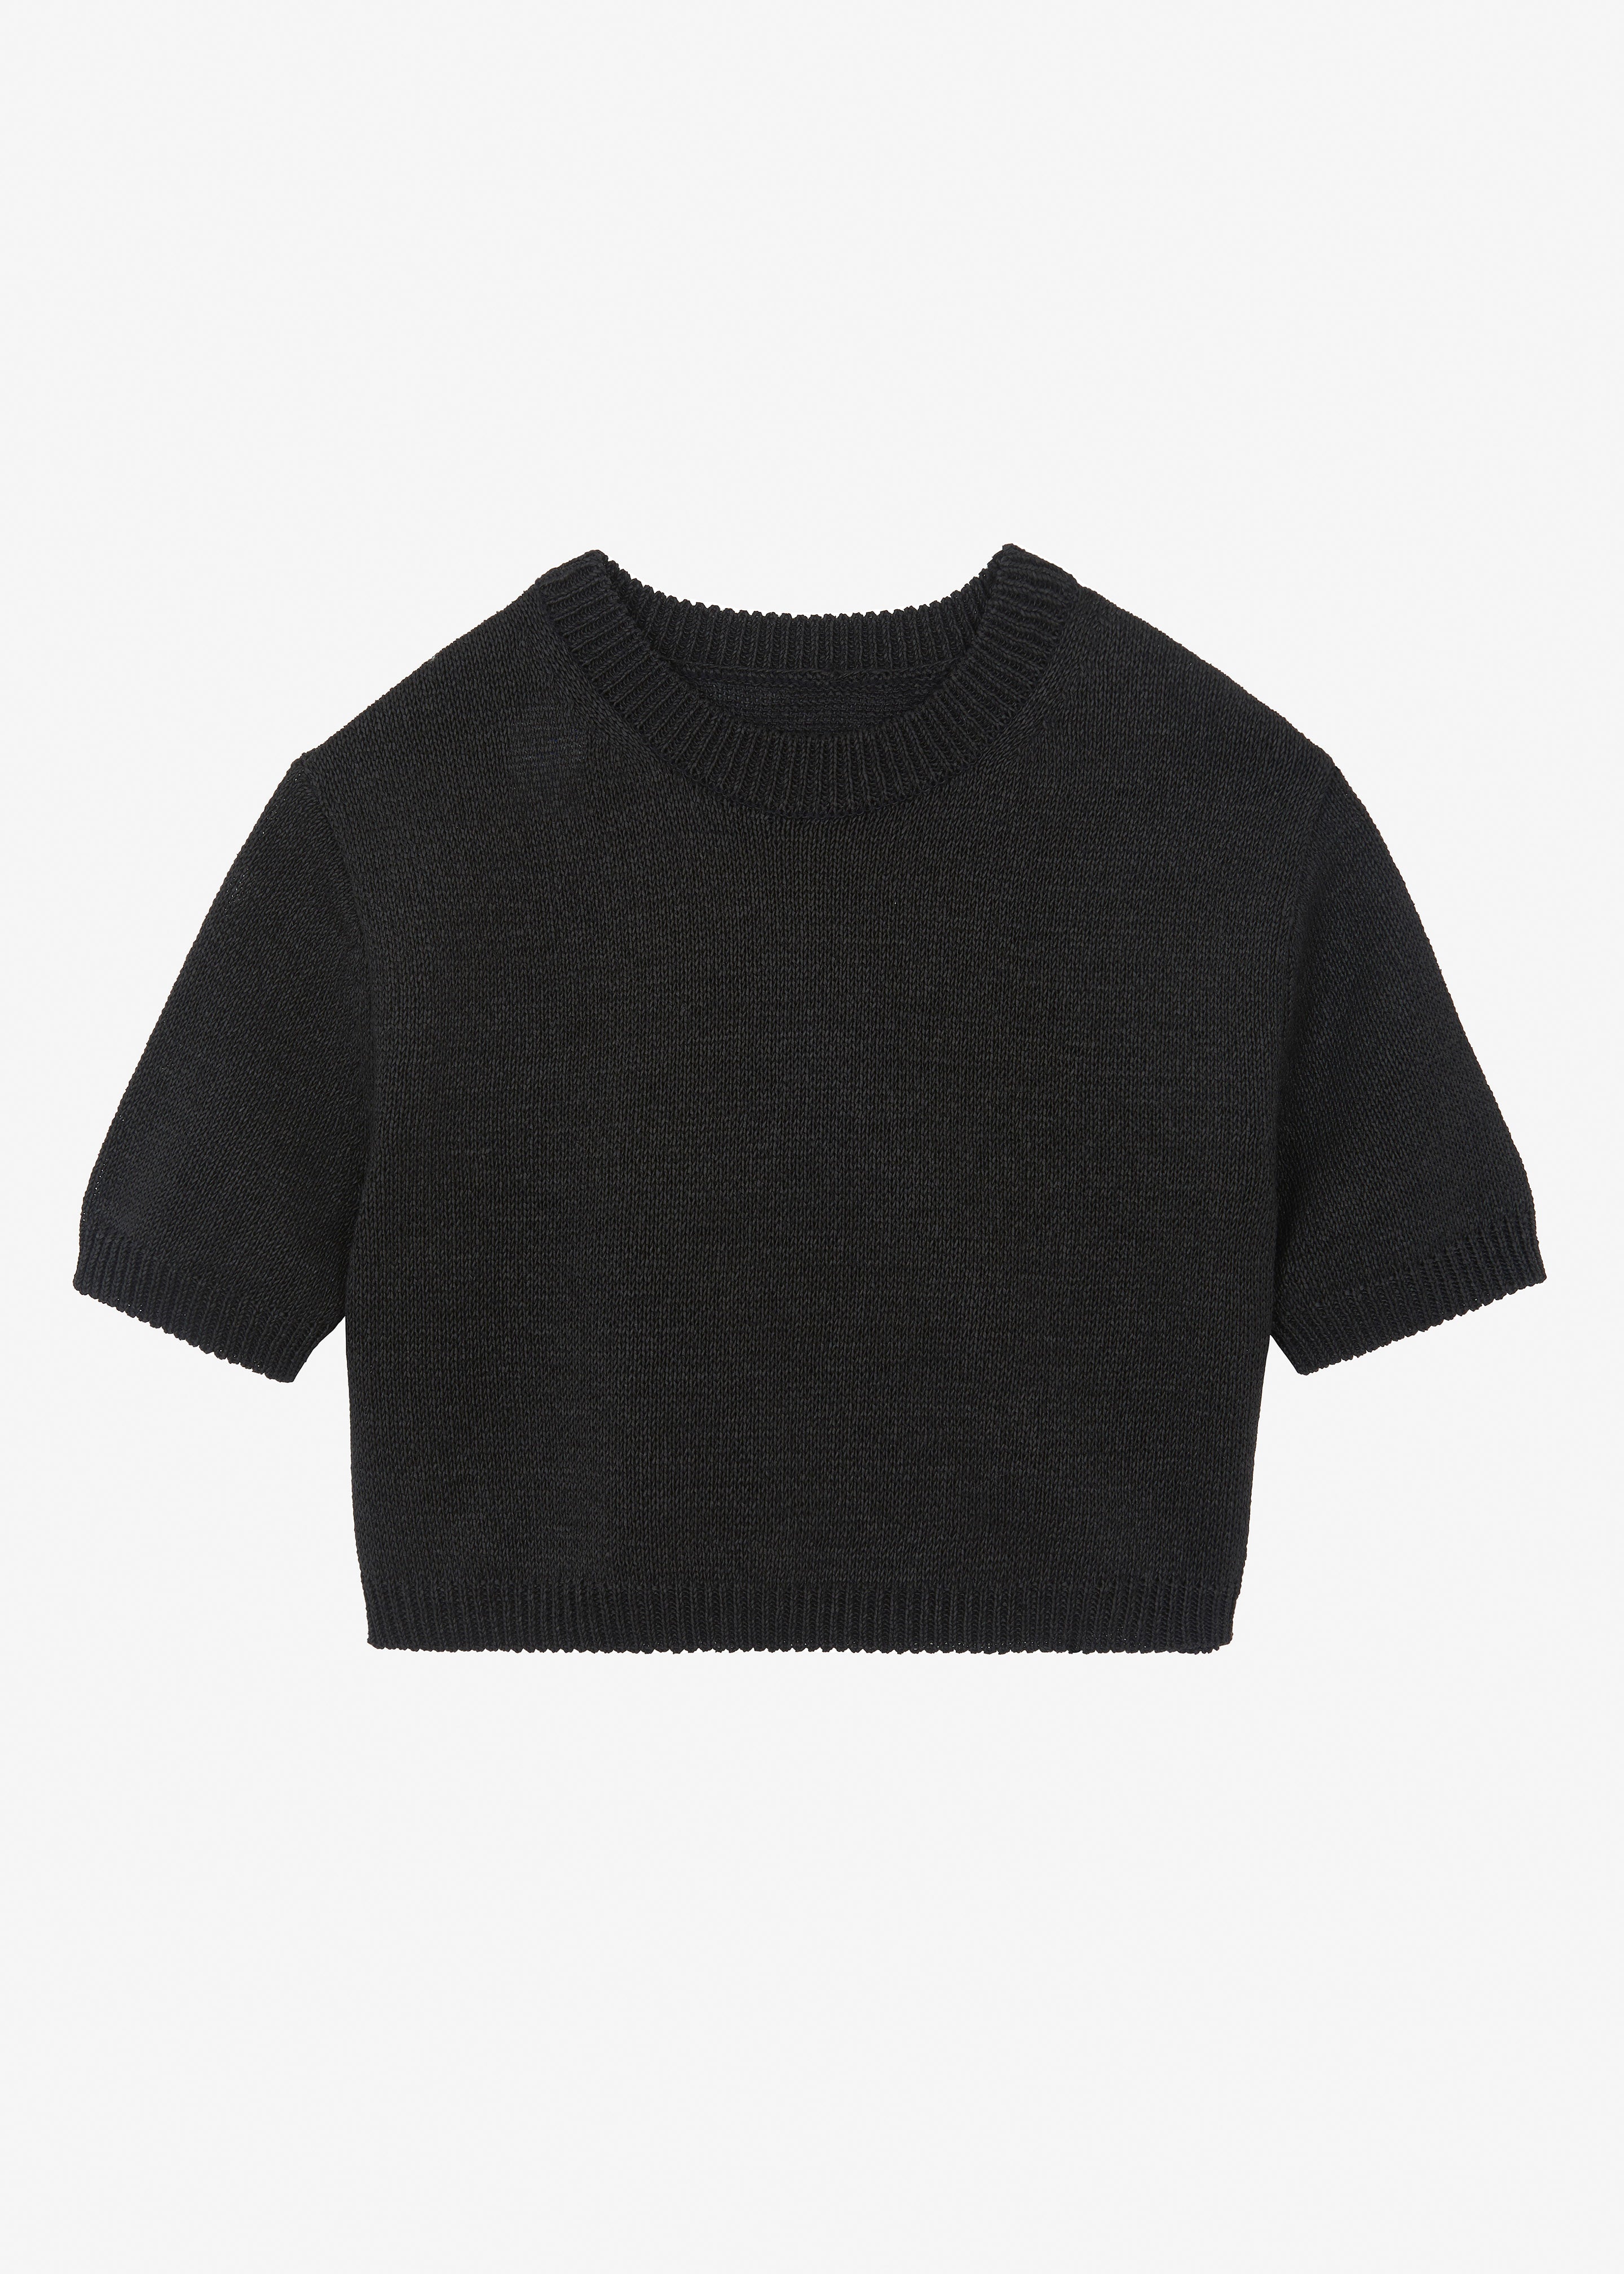 Holly Cropped Knit Top  - Black - 13